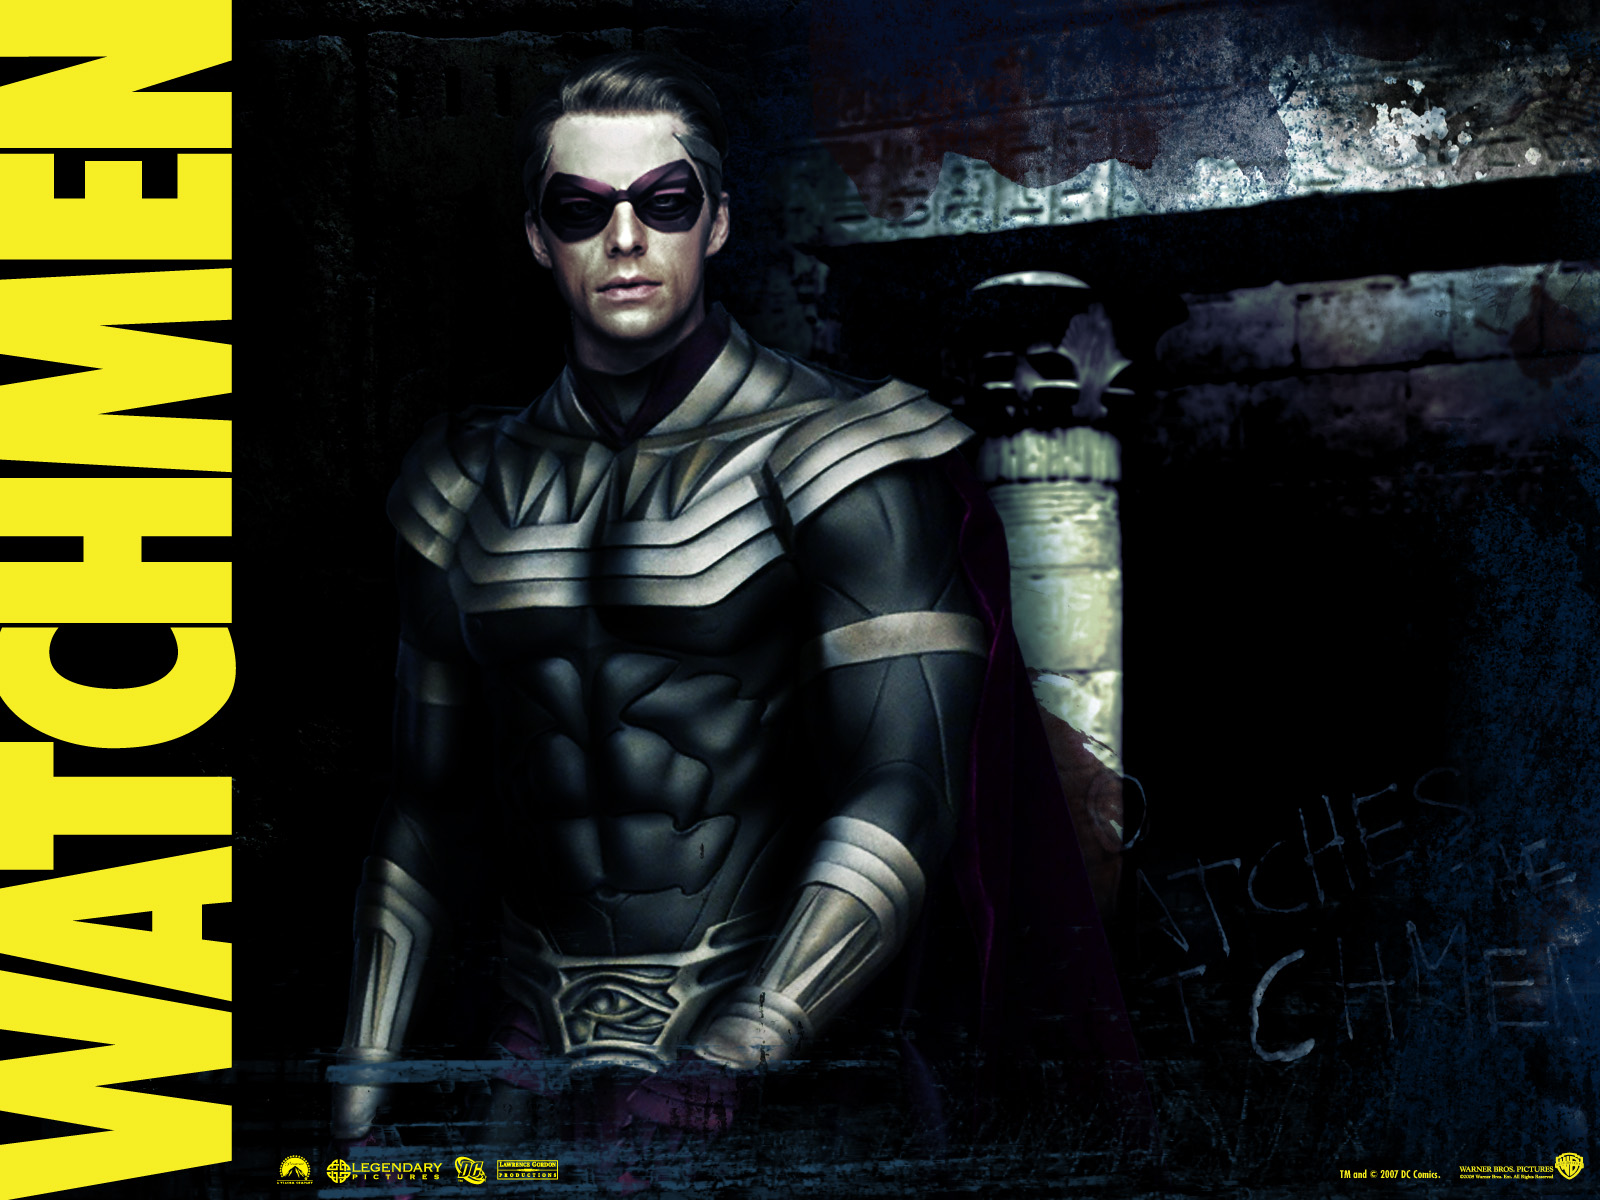 watchmen wallpaper hd,fictional character,movie,poster,action figure,album cover